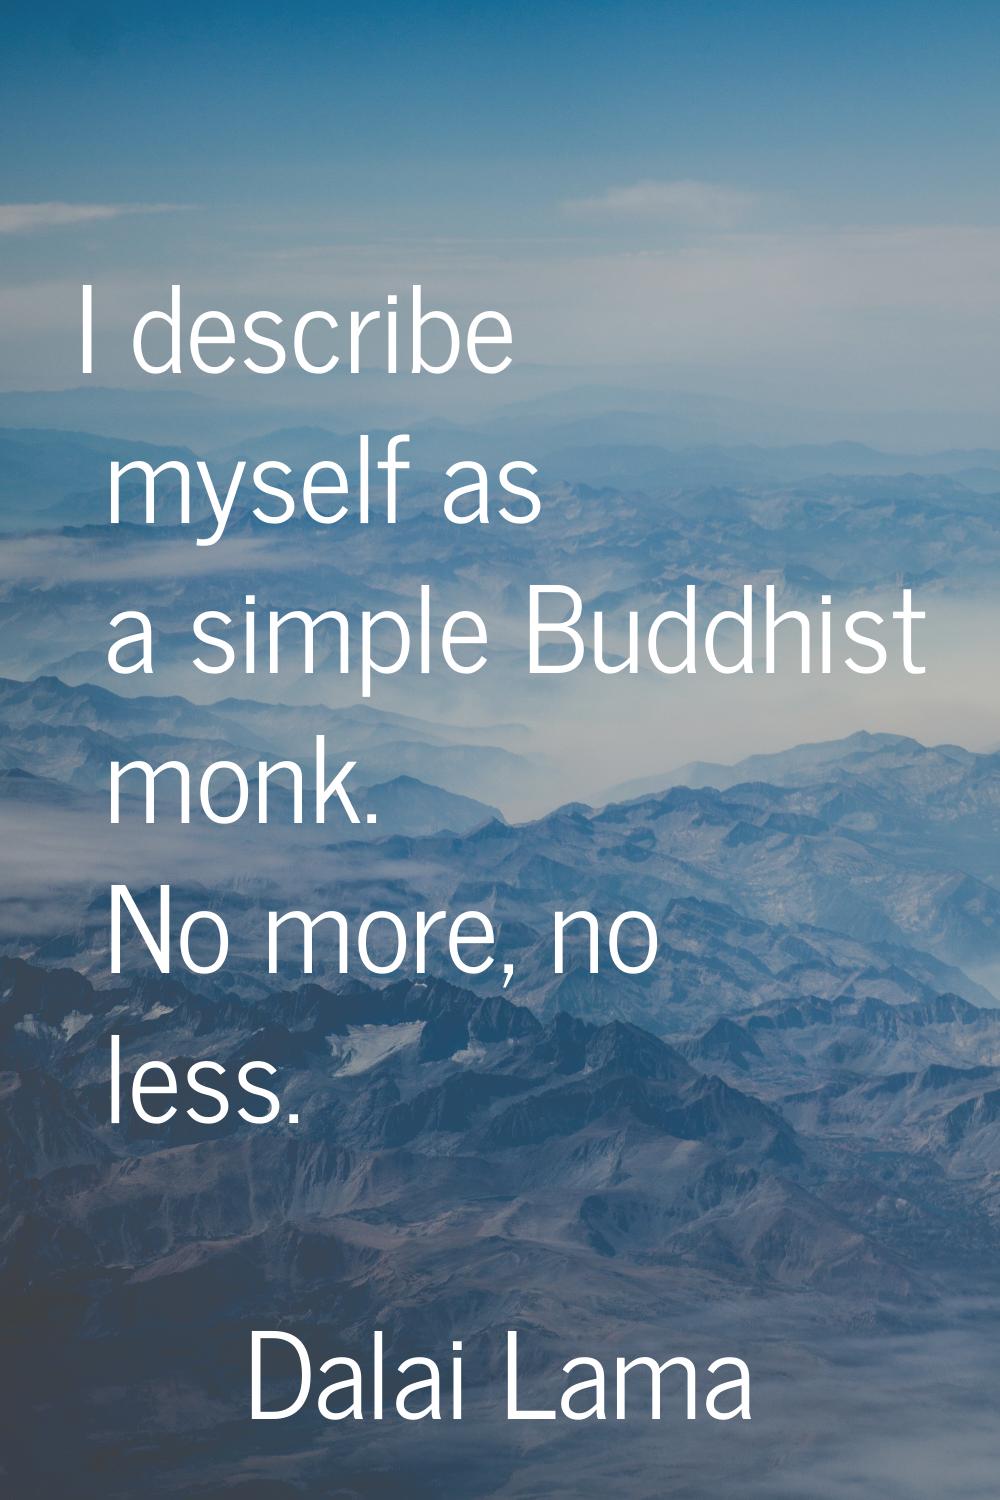 I describe myself as a simple Buddhist monk. No more, no less.